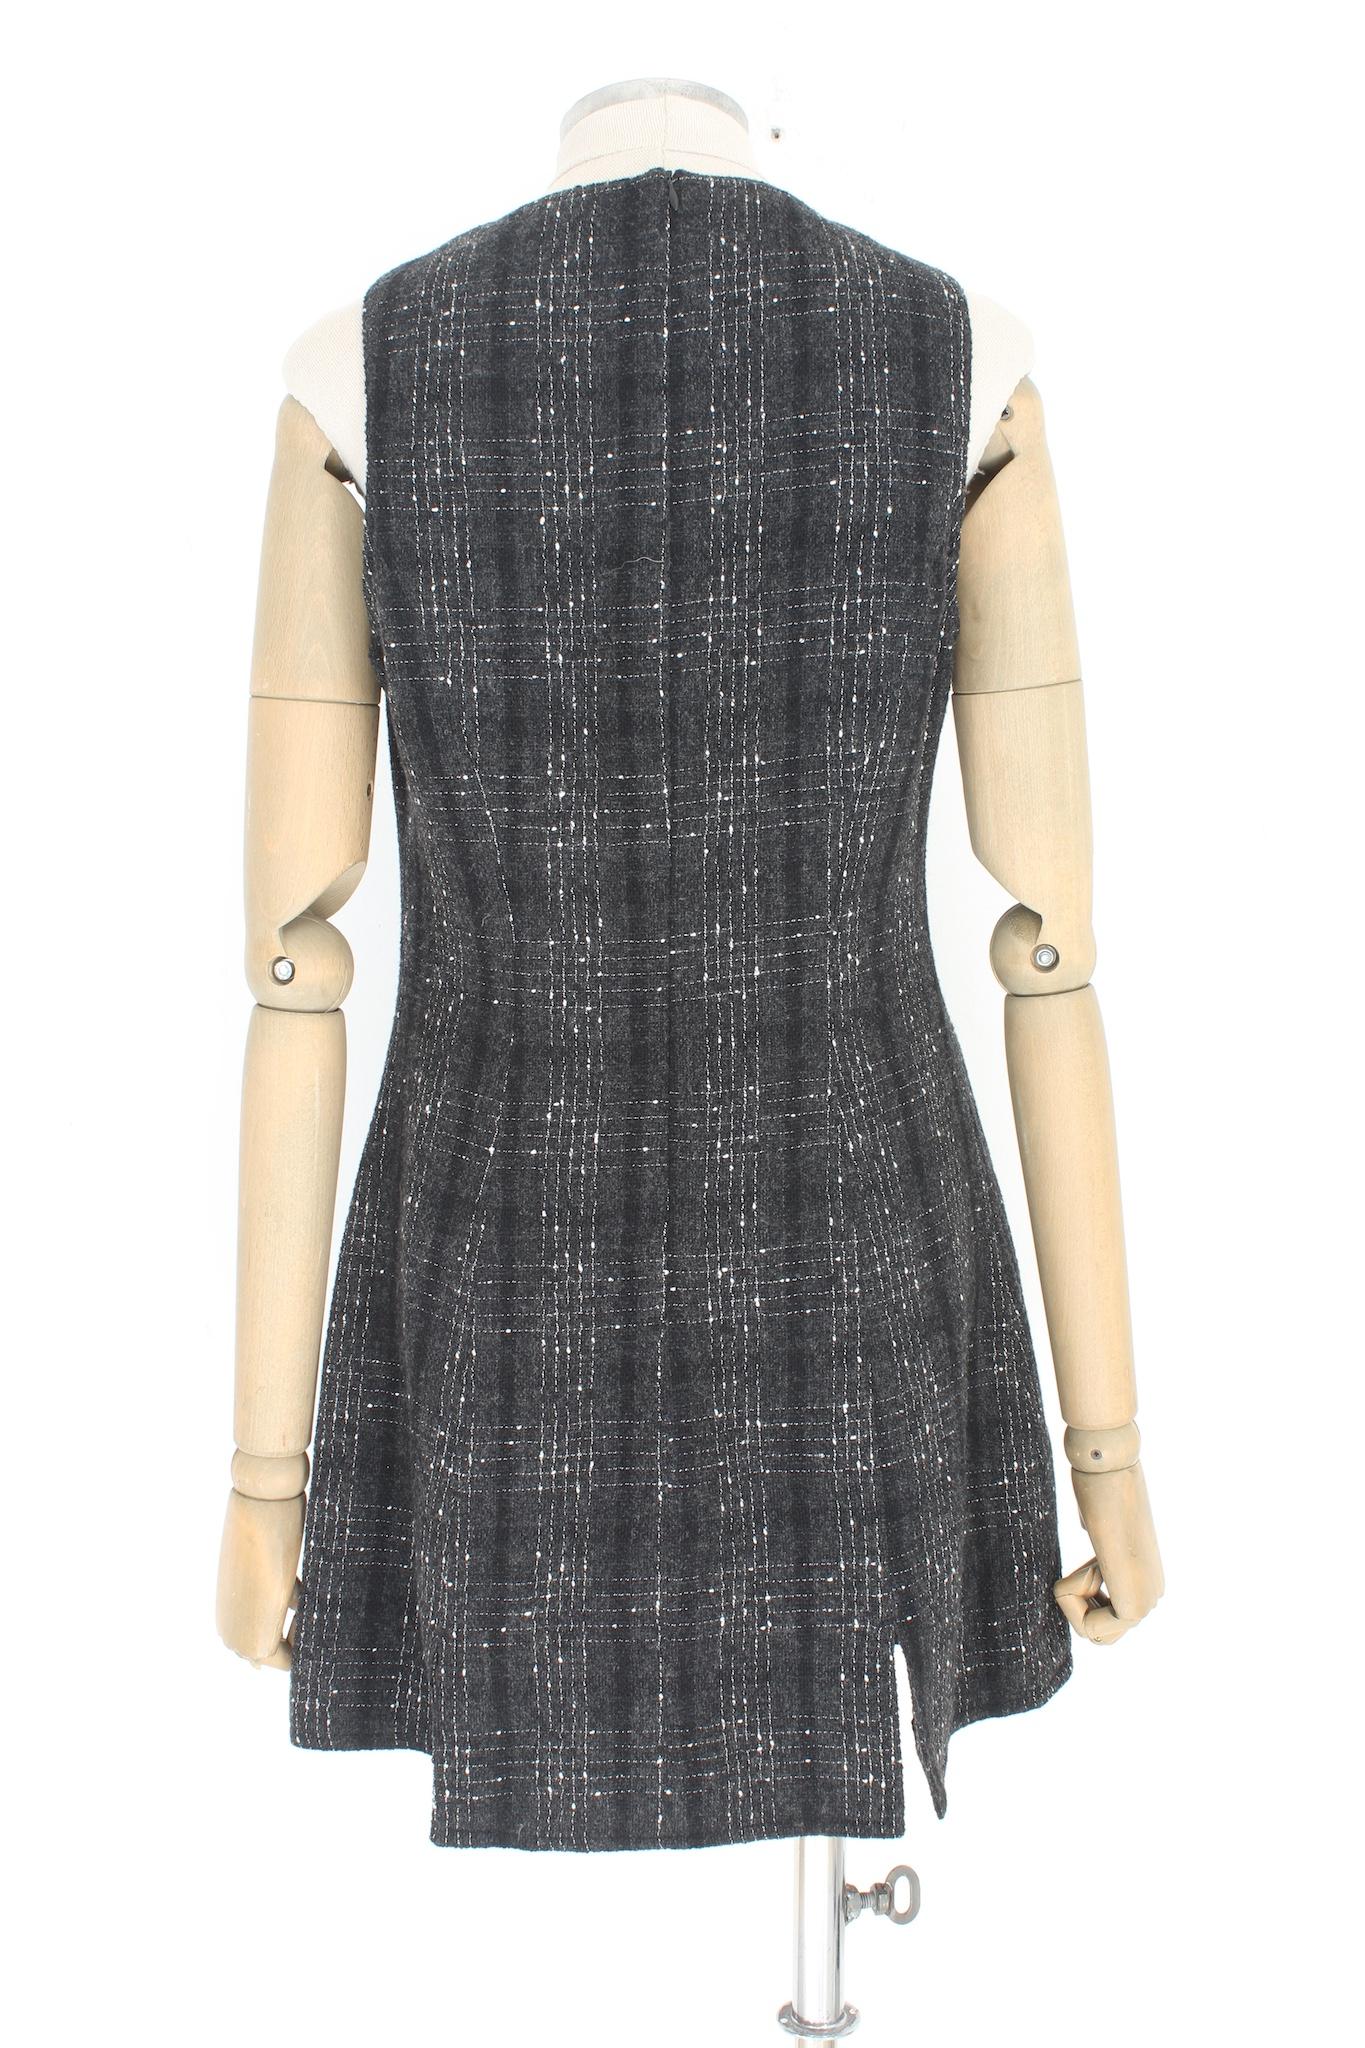 Versace Jeans Couture vintage 90s dress. Gray sheath dress with white stitching. Flared model in the skirt, 70% wool, 30% polyamide fabric, internally lined. Made in Italy.

Size: 44 It - 10 Us - 12 Uk

Shoulder: 33 cm
Bust/Chest: 47cm
Waist: 38